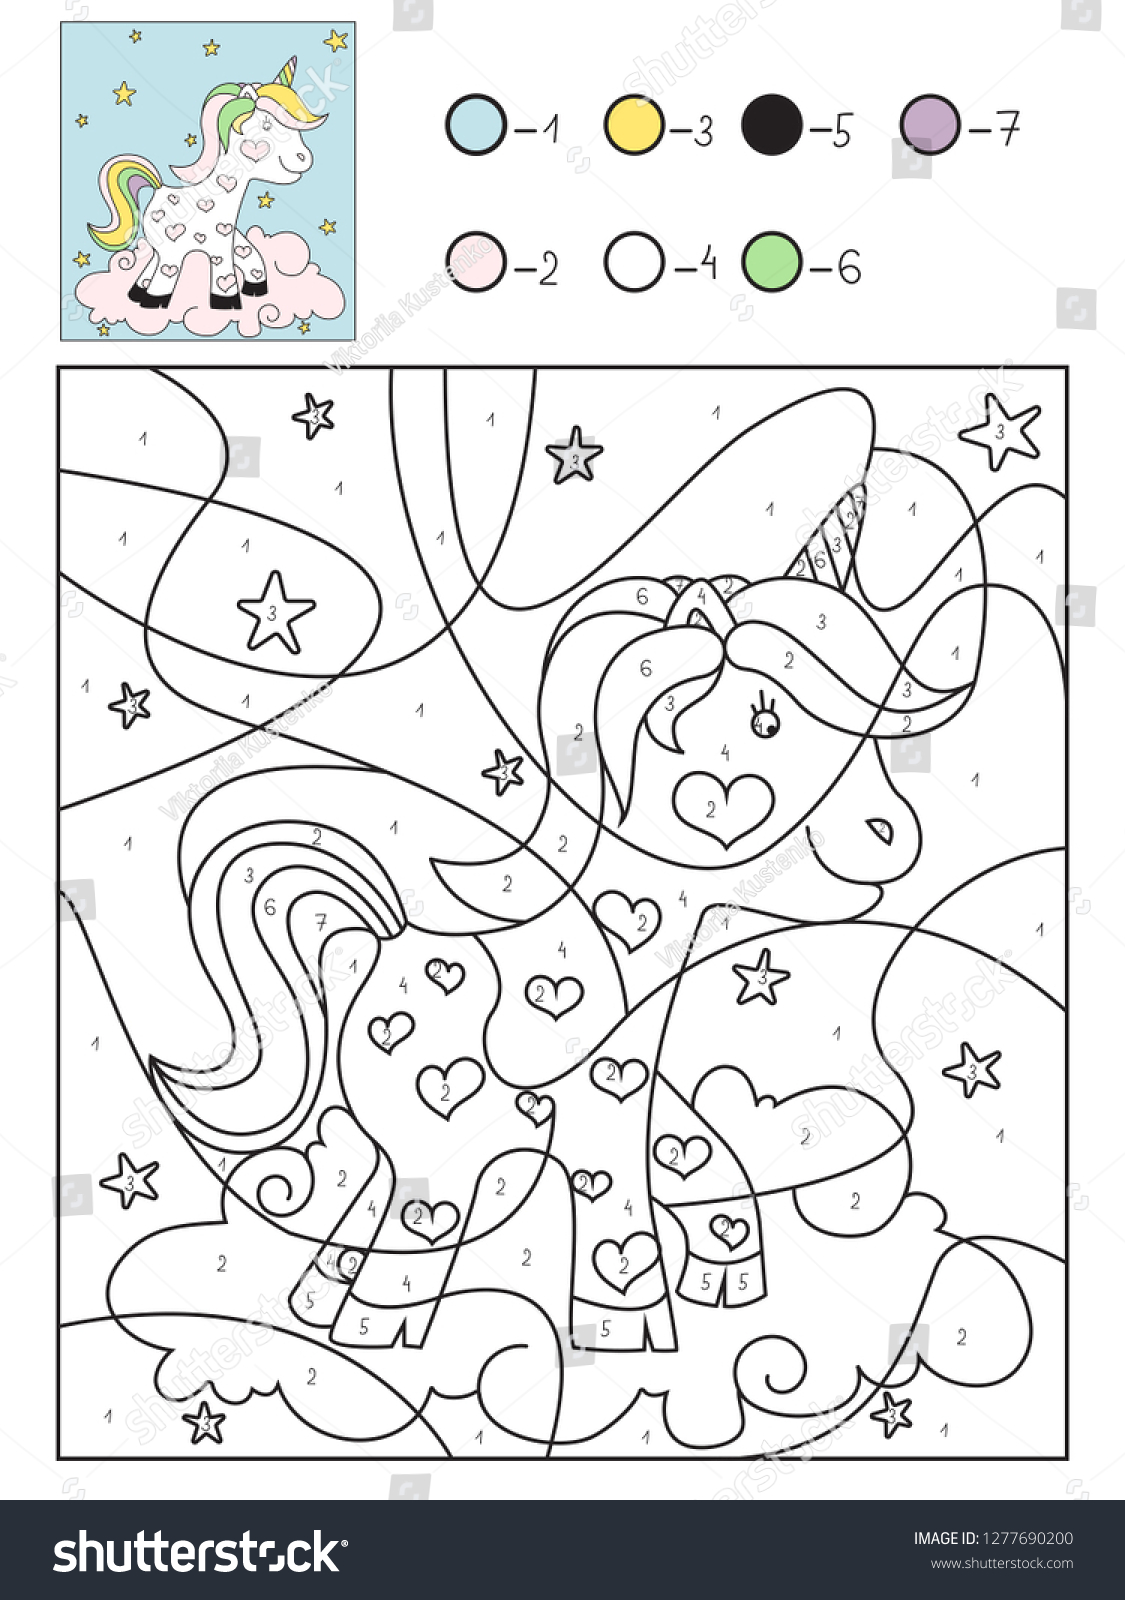 Download Cute Unicorn Vector Coloring Book By Stock Vector Royalty Free 1277690200